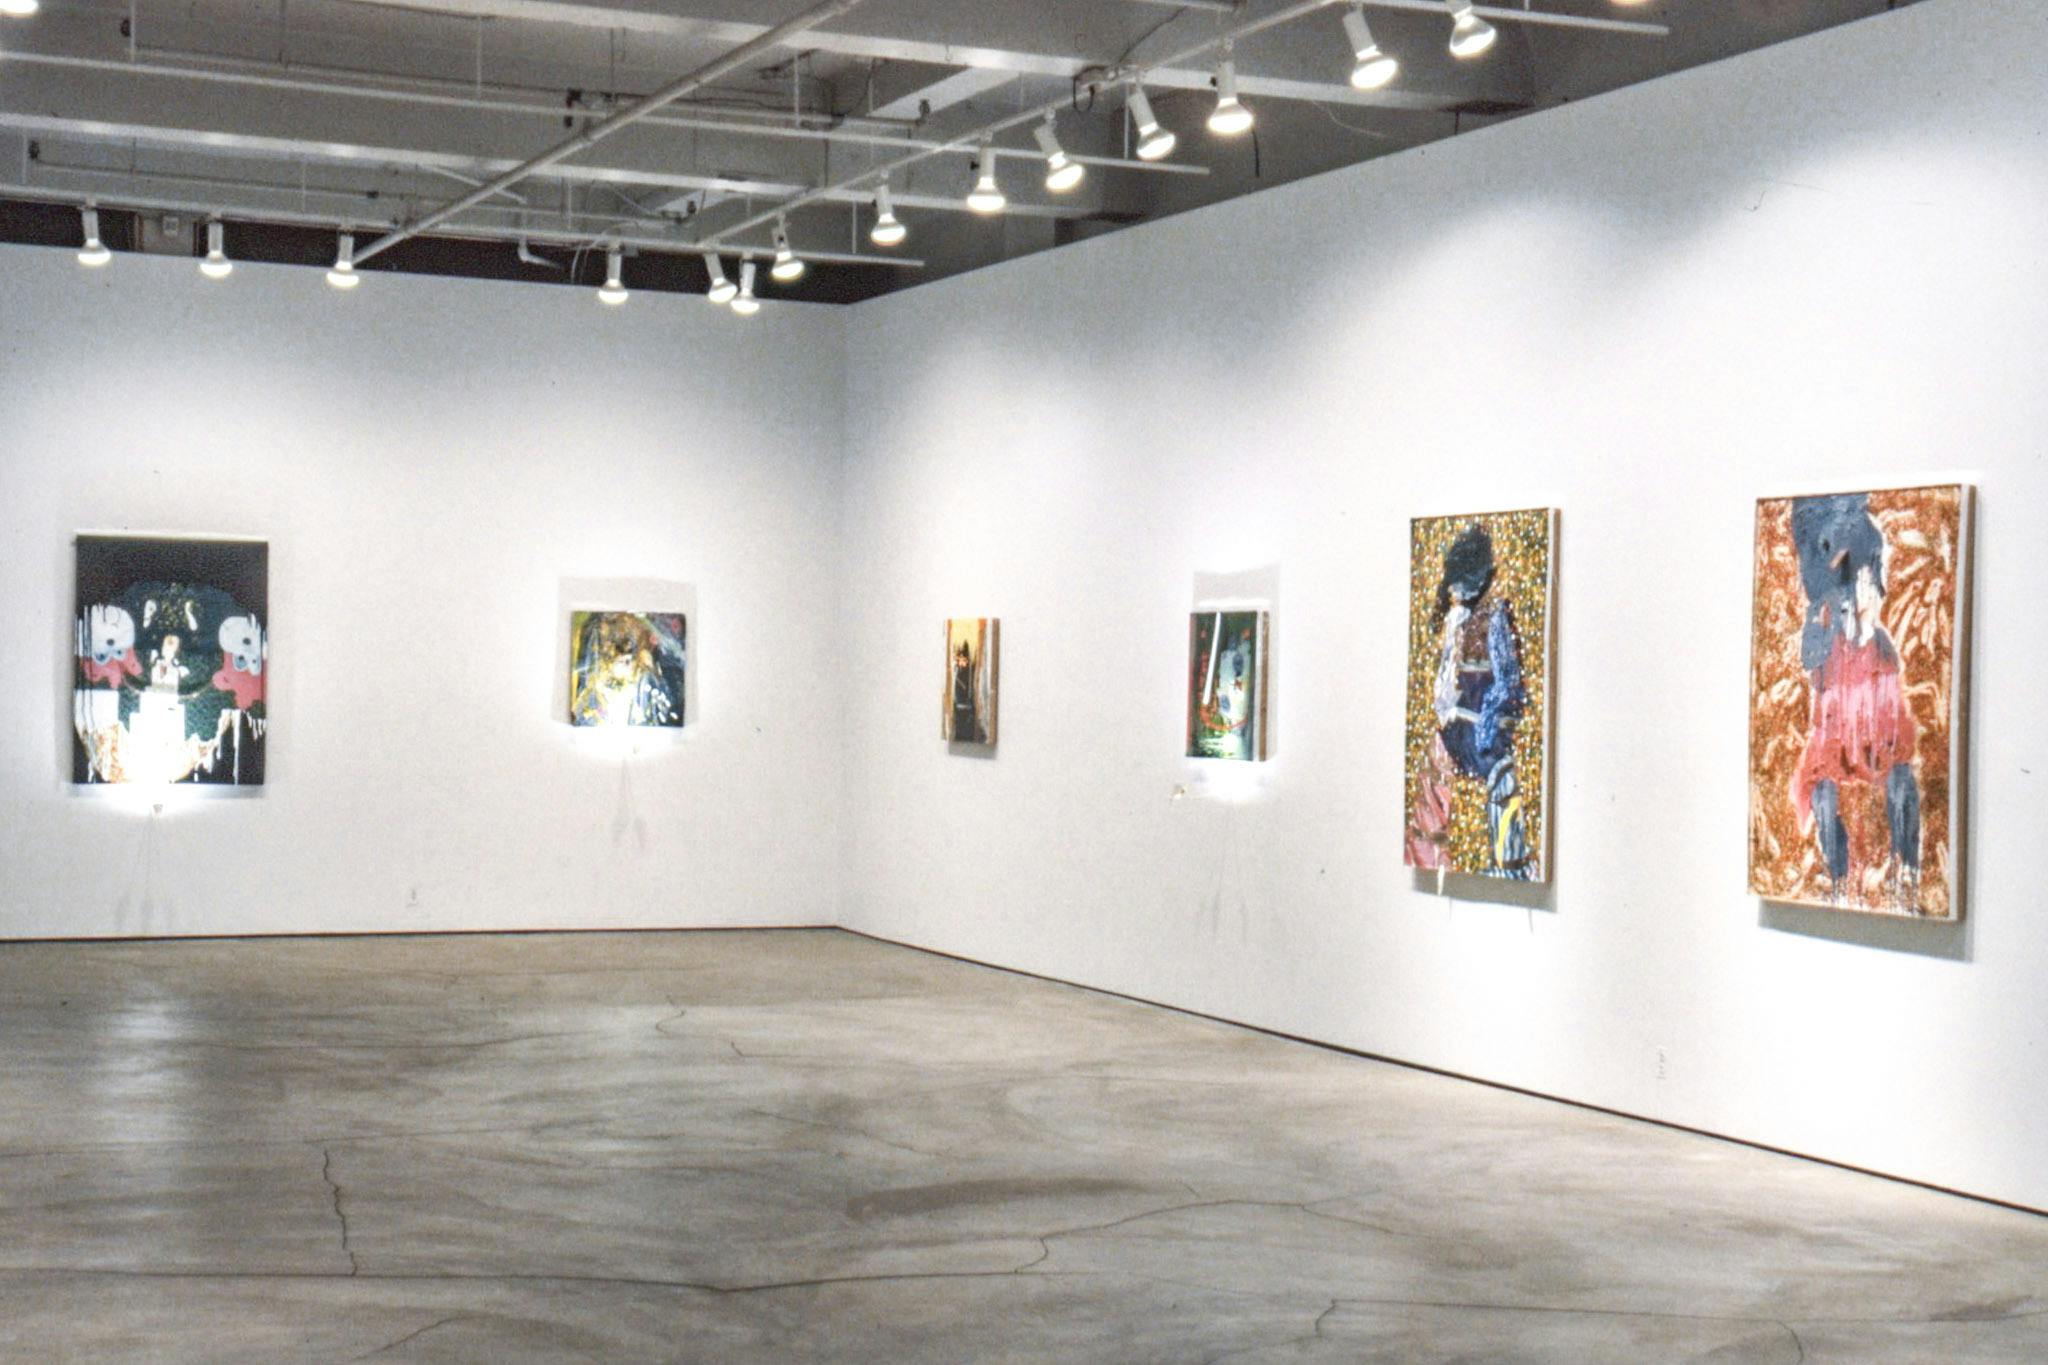 Six visible paintings on the walls in the corner of a gallery. The paintings are colourful and vary in size. Three of them have bright lights attached just underneath them, creating bright spots. 